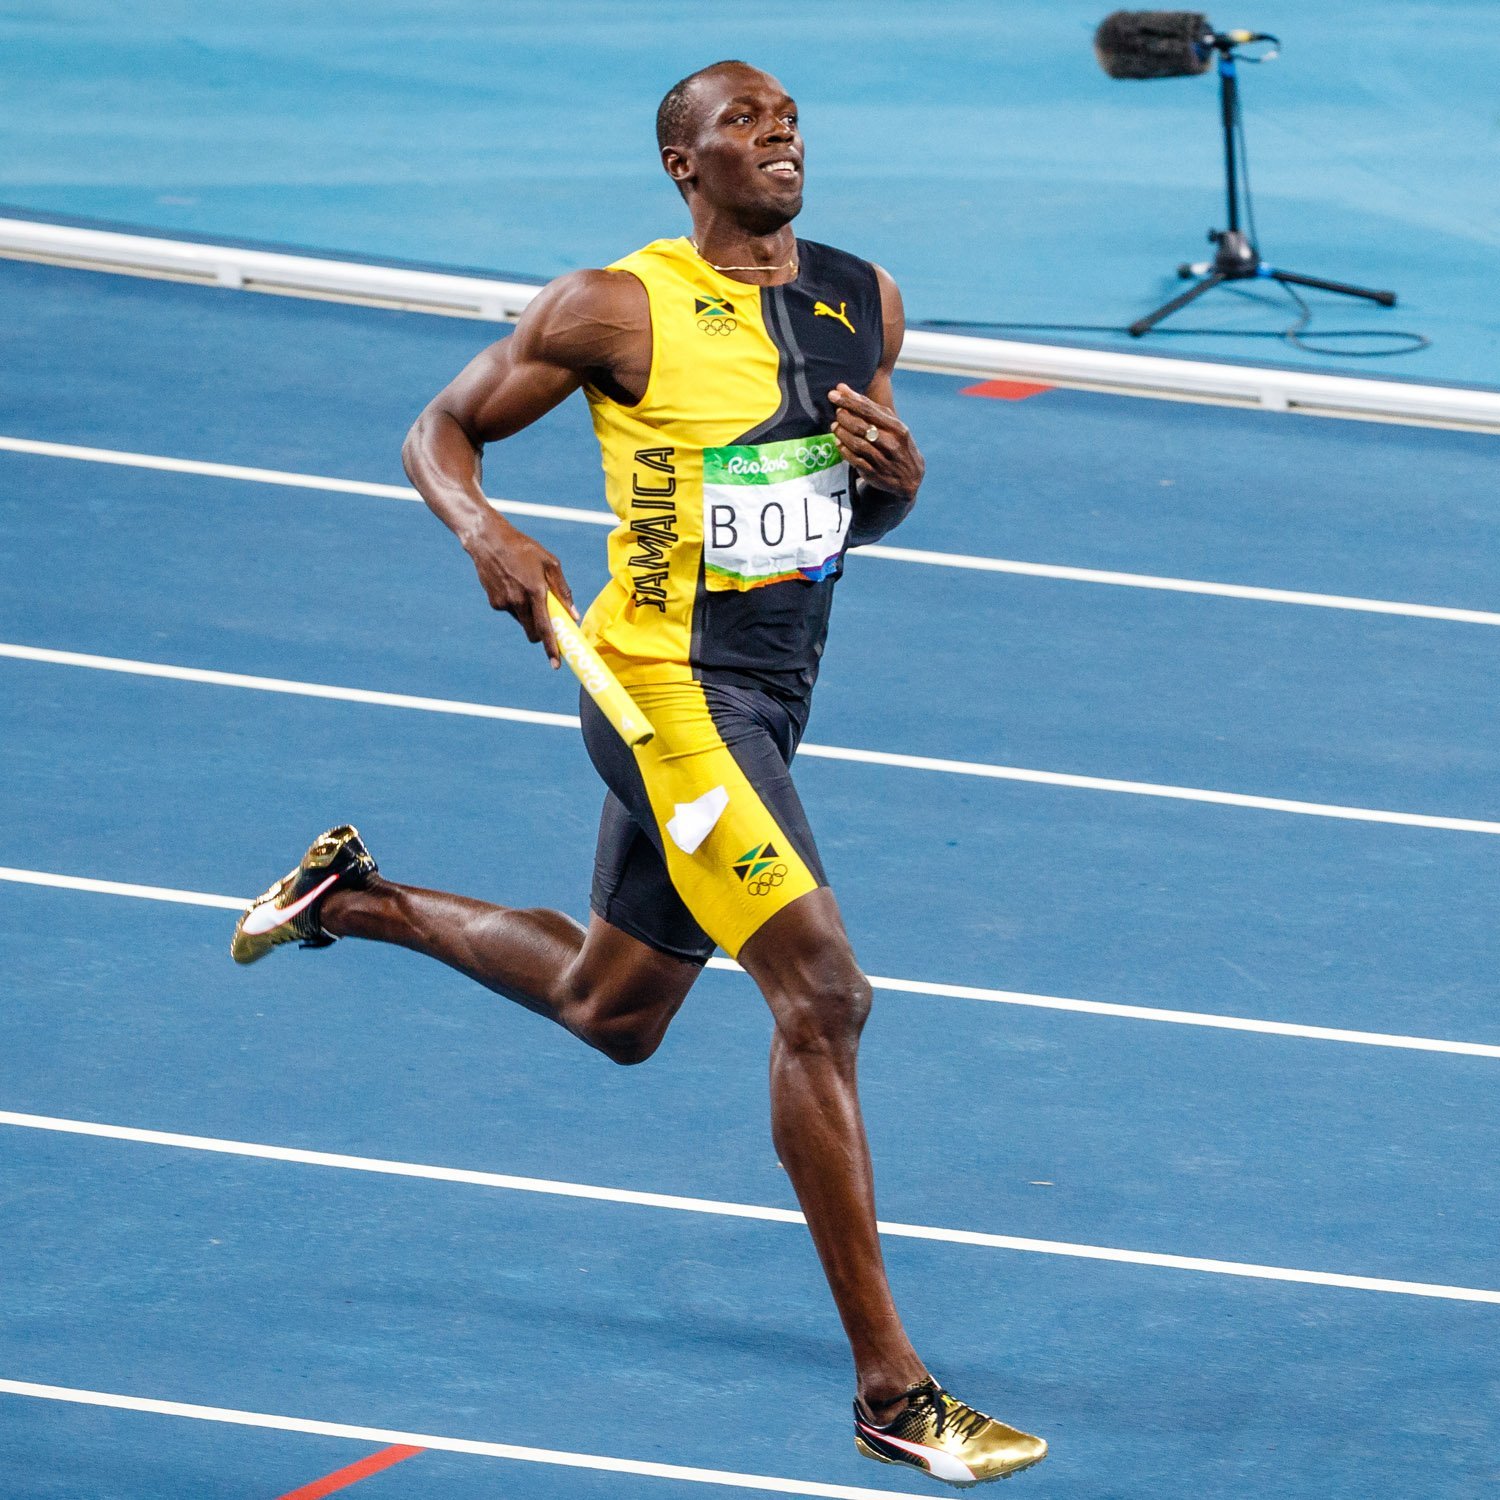 How fast is Usain Bolt compared to the worlds fastest animals and machines?